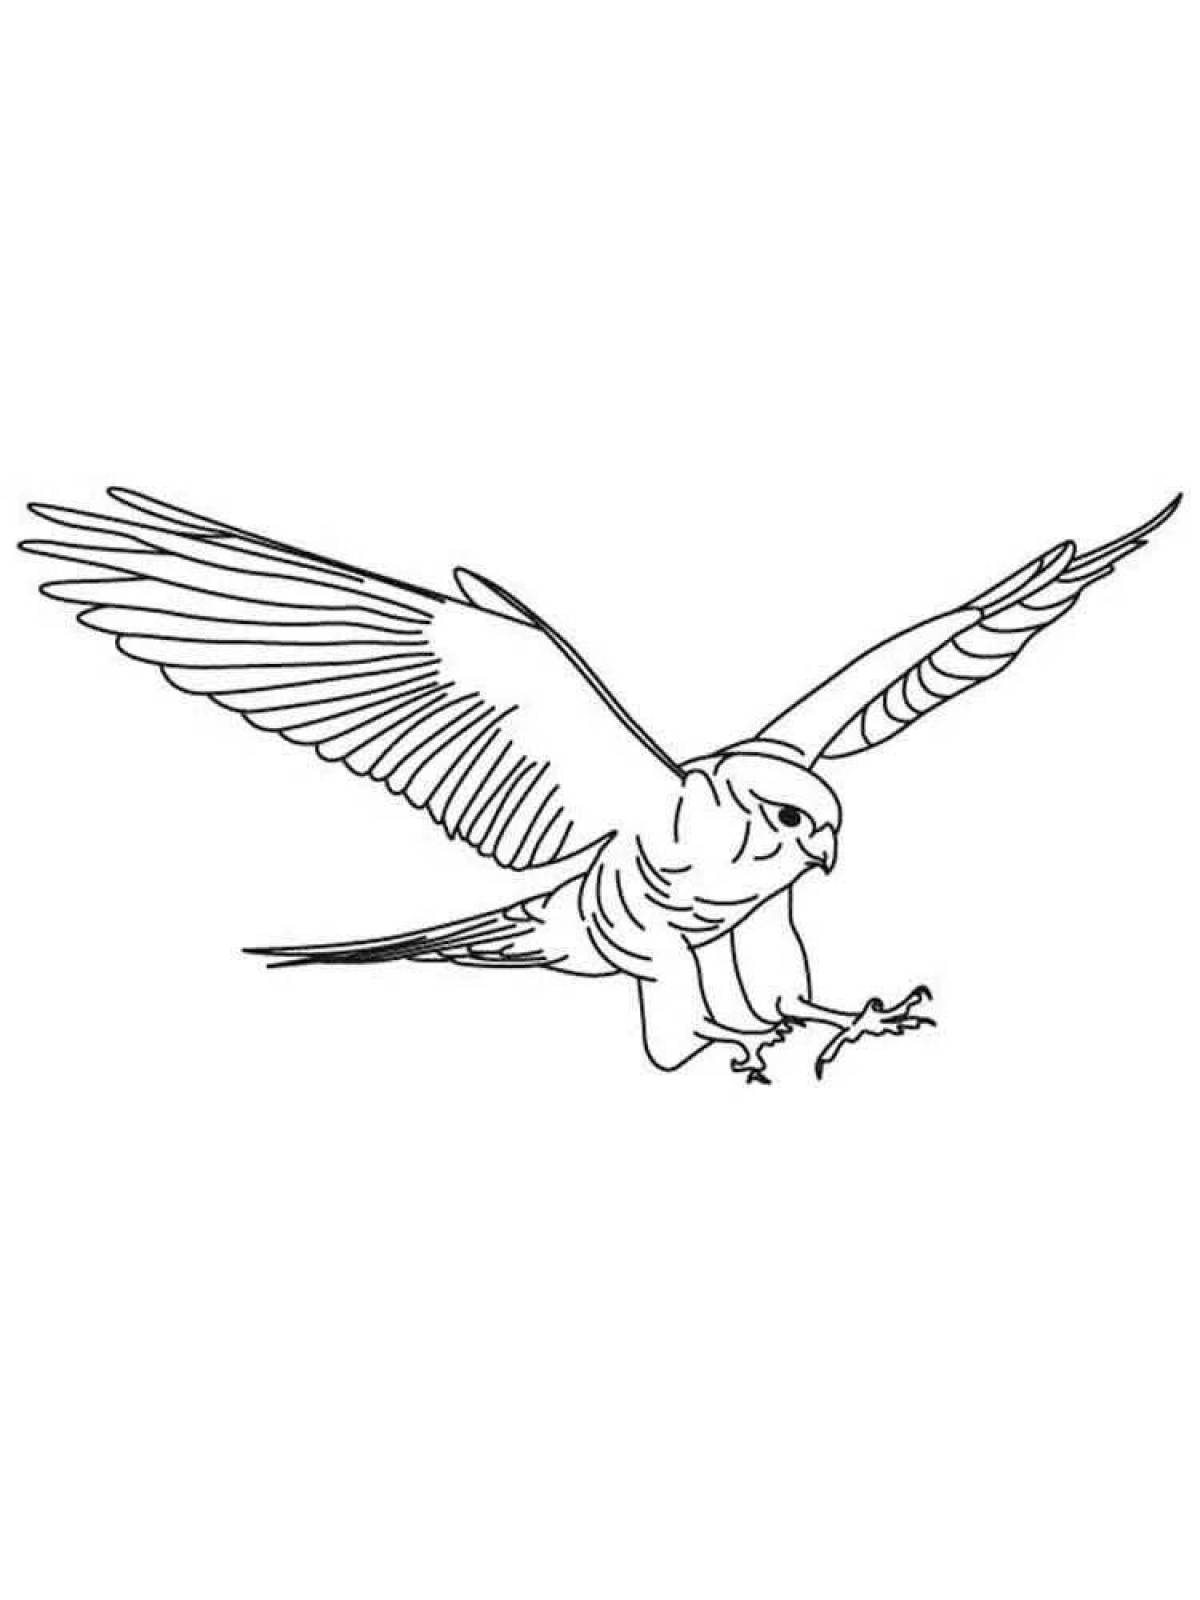 Flawless Falcon coloring page